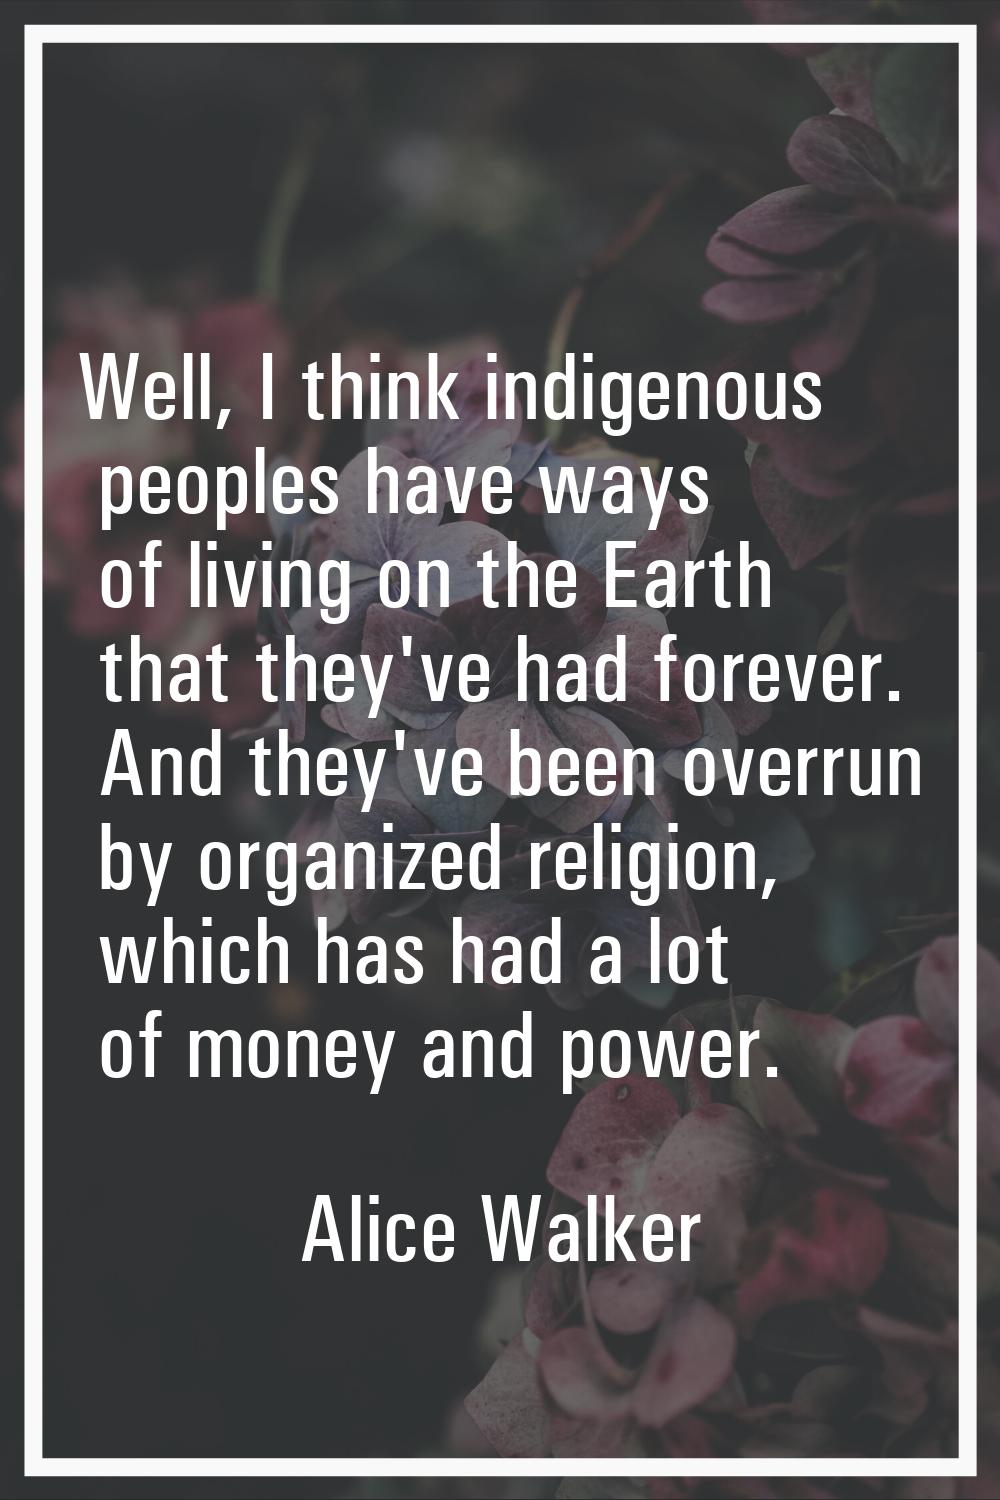 Well, I think indigenous peoples have ways of living on the Earth that they've had forever. And the